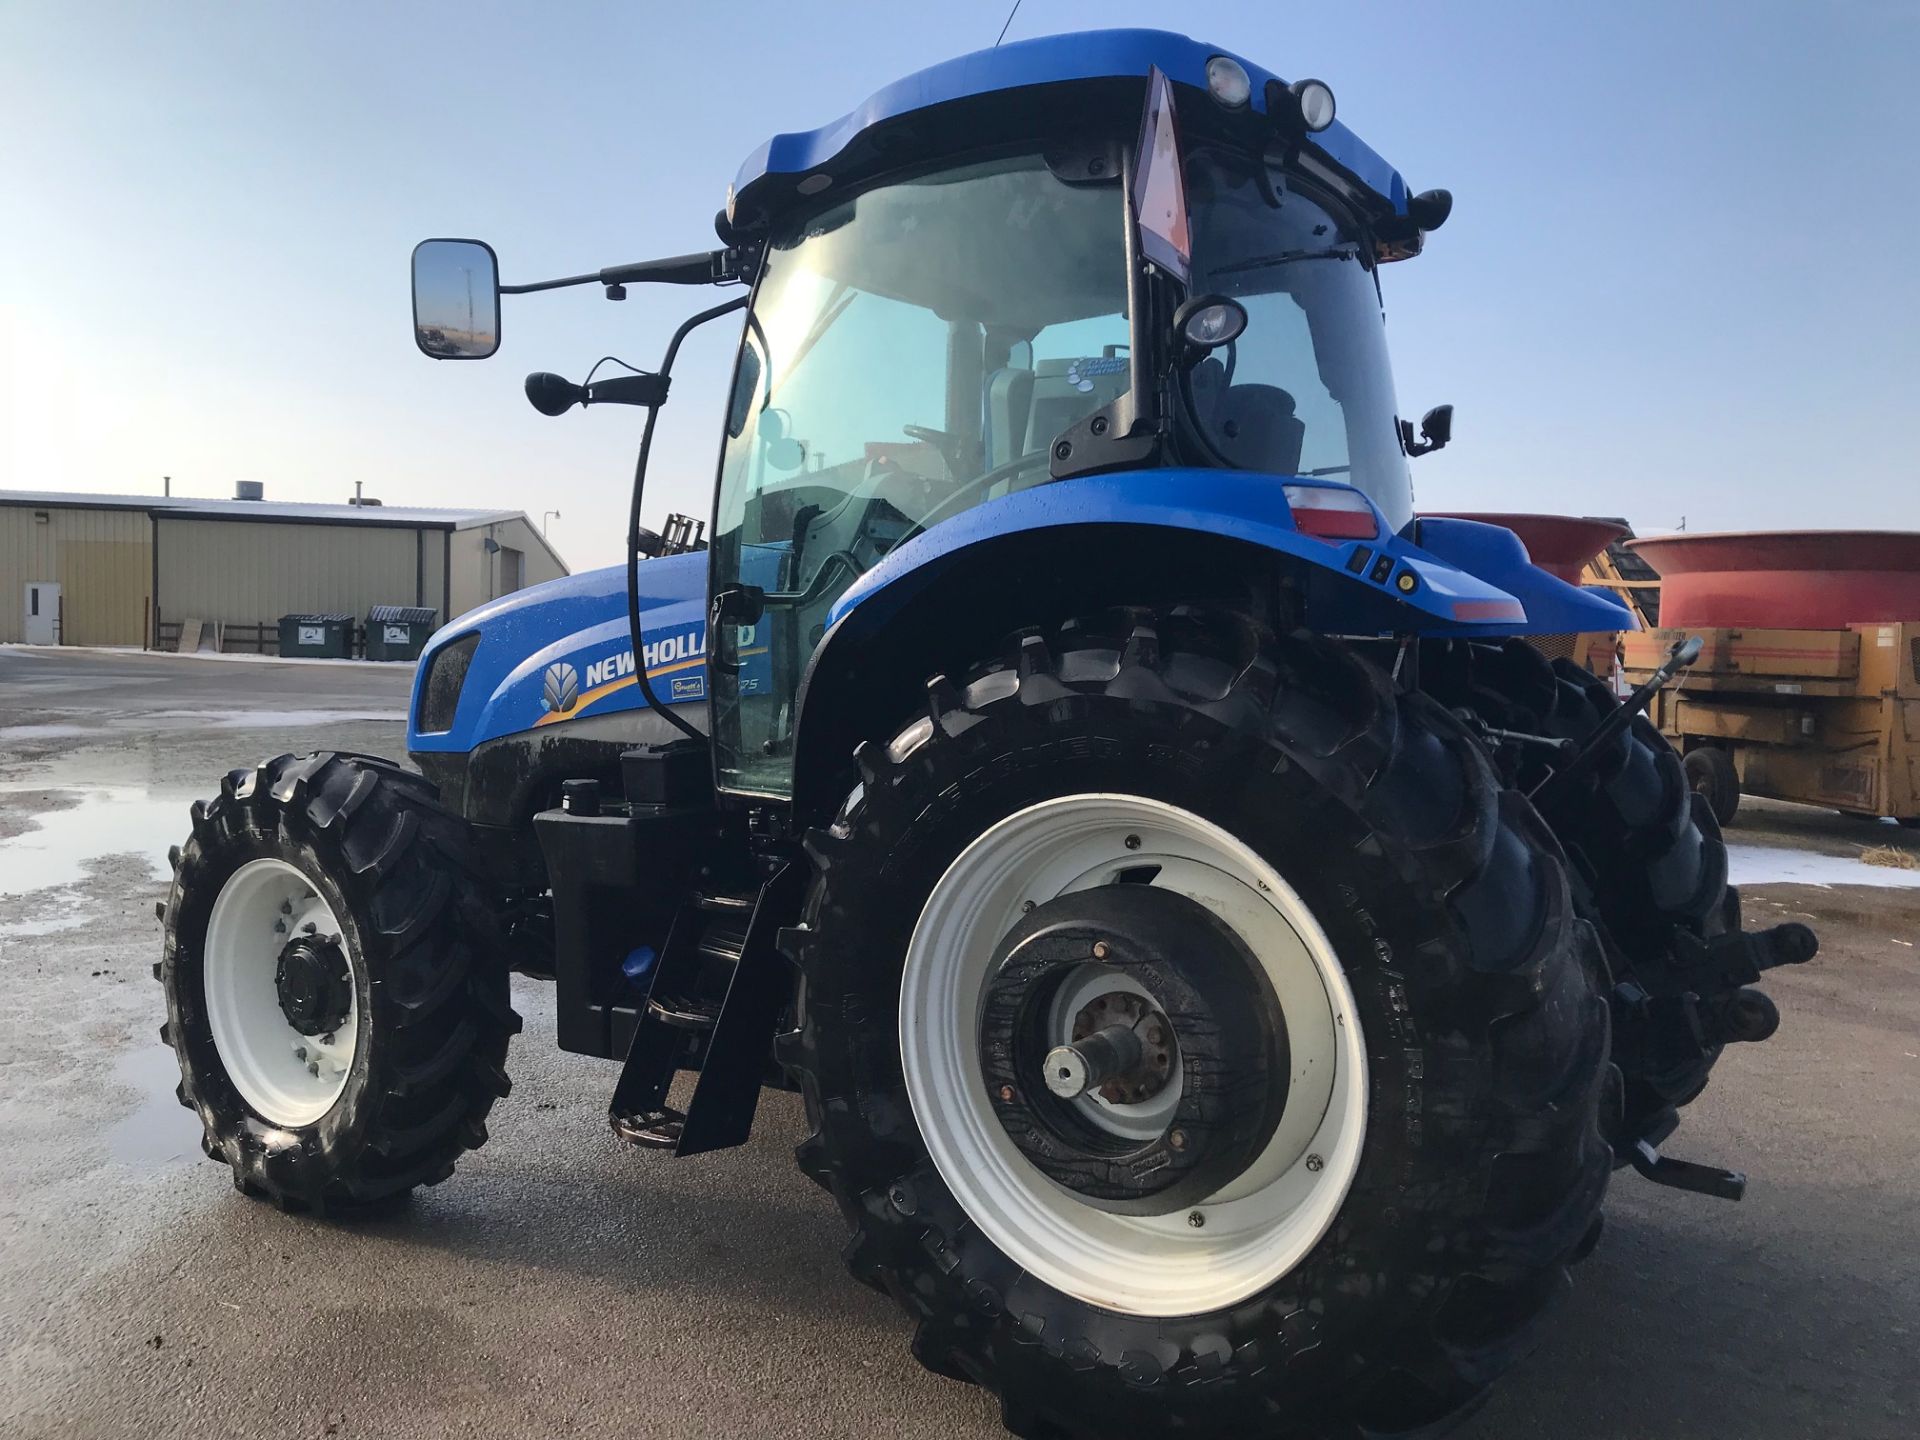 '14 New Holland T6.175 MFWD Tractor, SN ZEBD01738 - Image 2 of 7